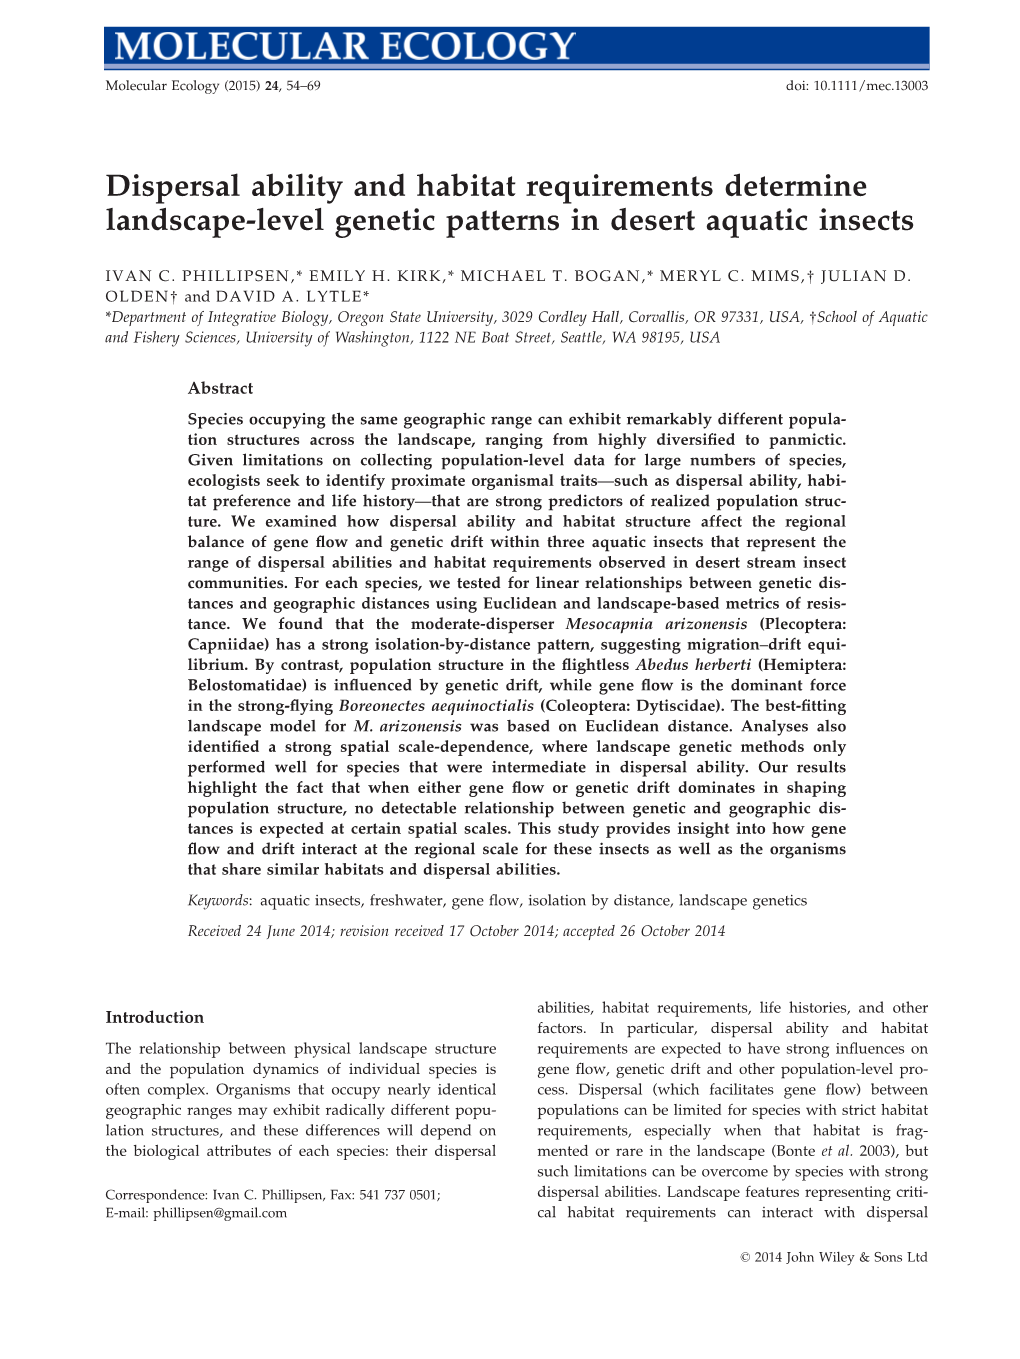 Dispersal Ability and Habitat Requirements Determine Landscape-Level Genetic Patterns in Desert Aquatic Insects